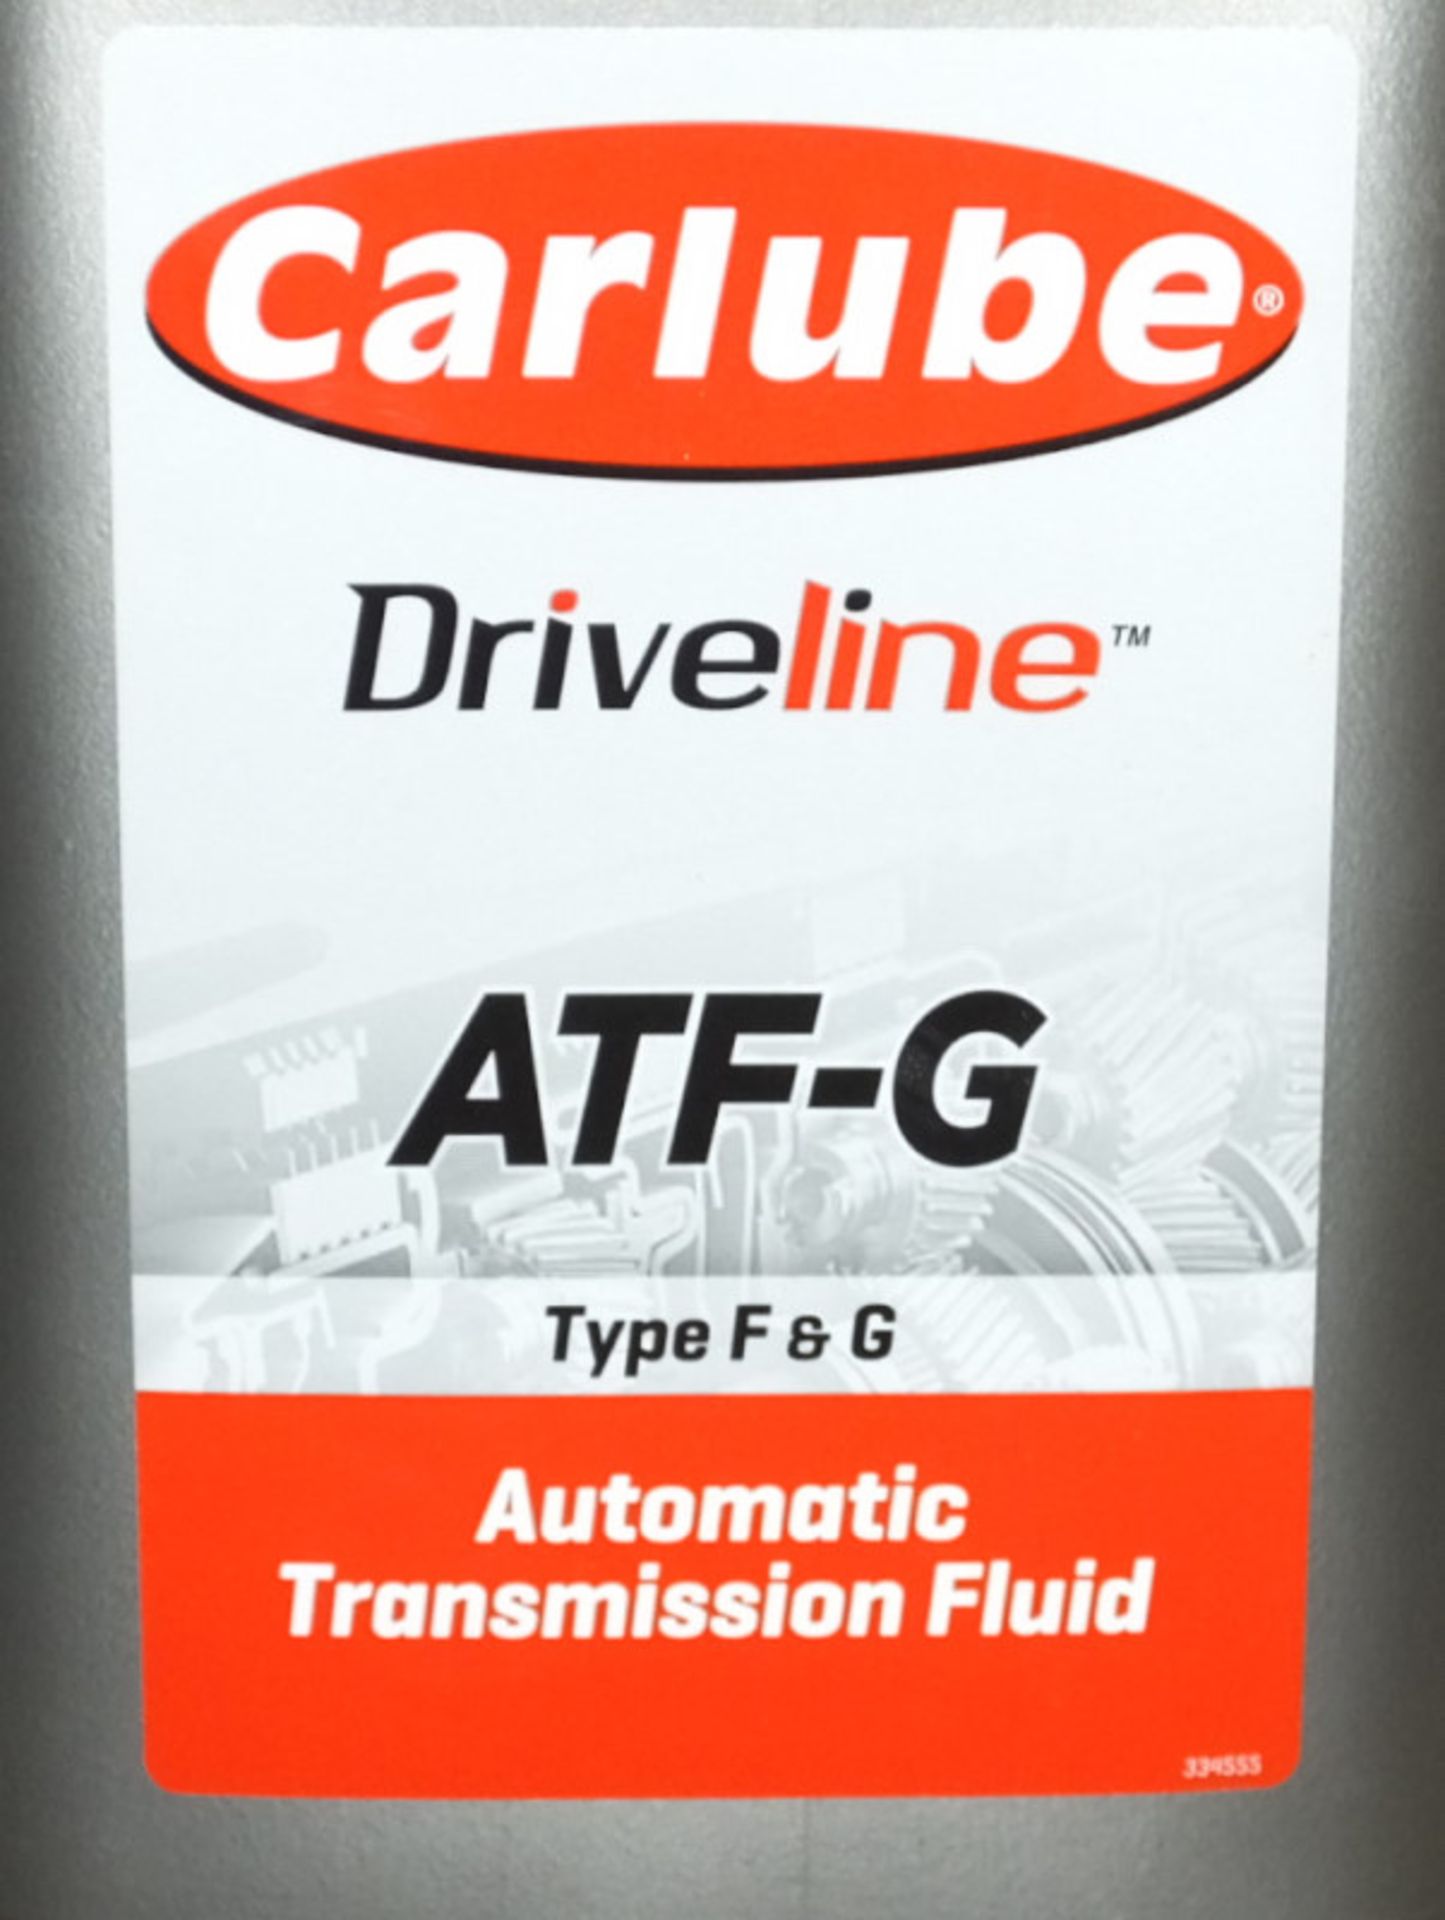 3x Carlube ATF-G Automatic Transmission Fluid (Type F & G) - 4.55L - Image 2 of 2